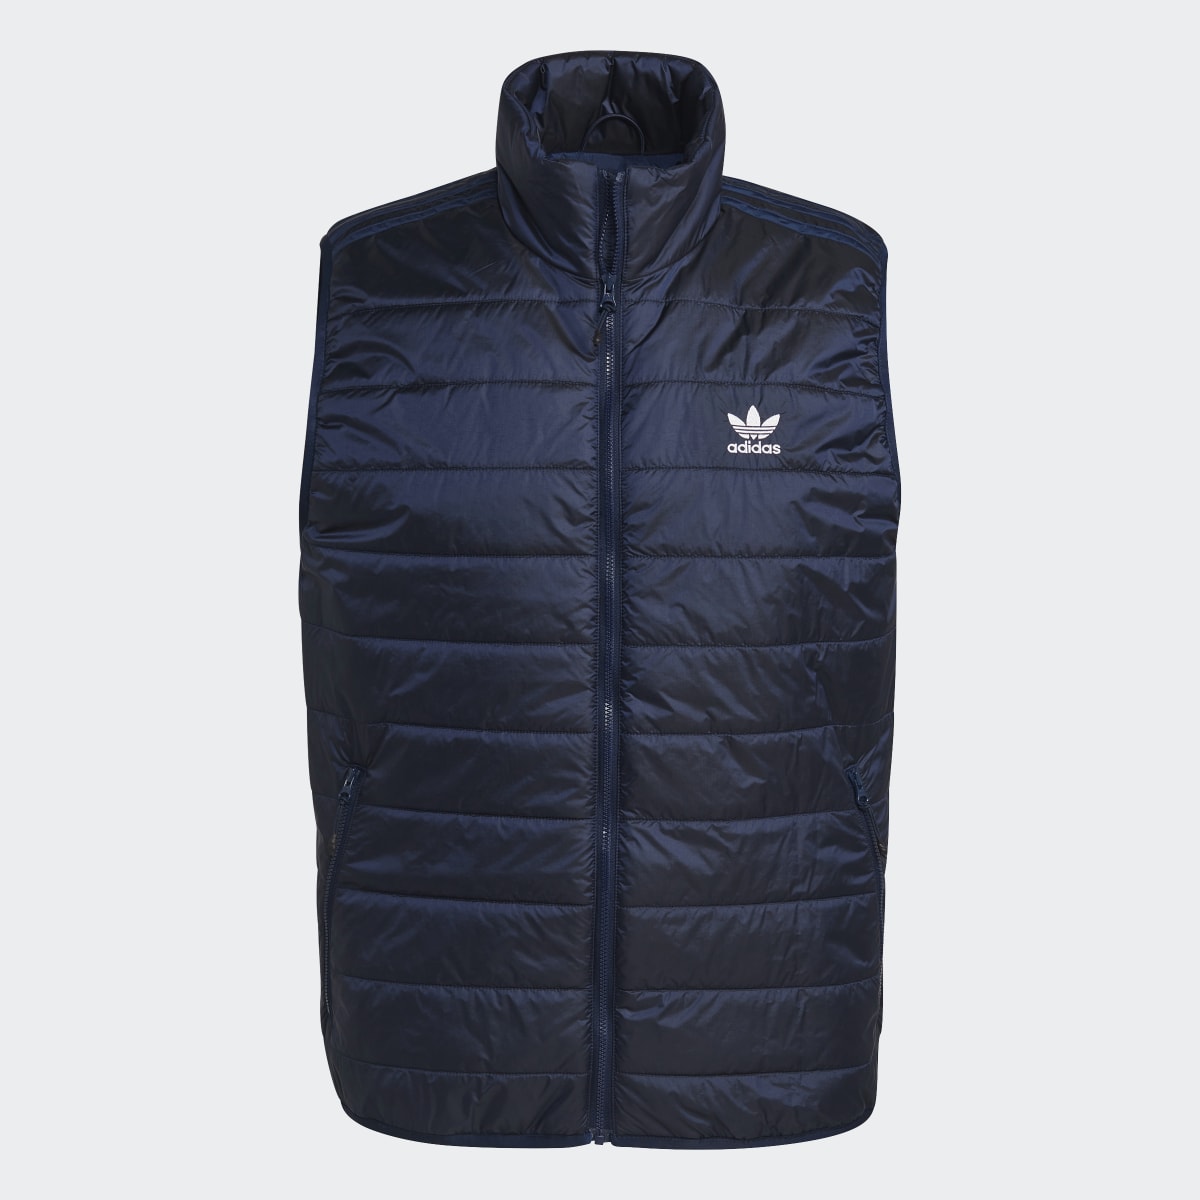 Adidas Padded Stand Collar Puffer Vest. 5